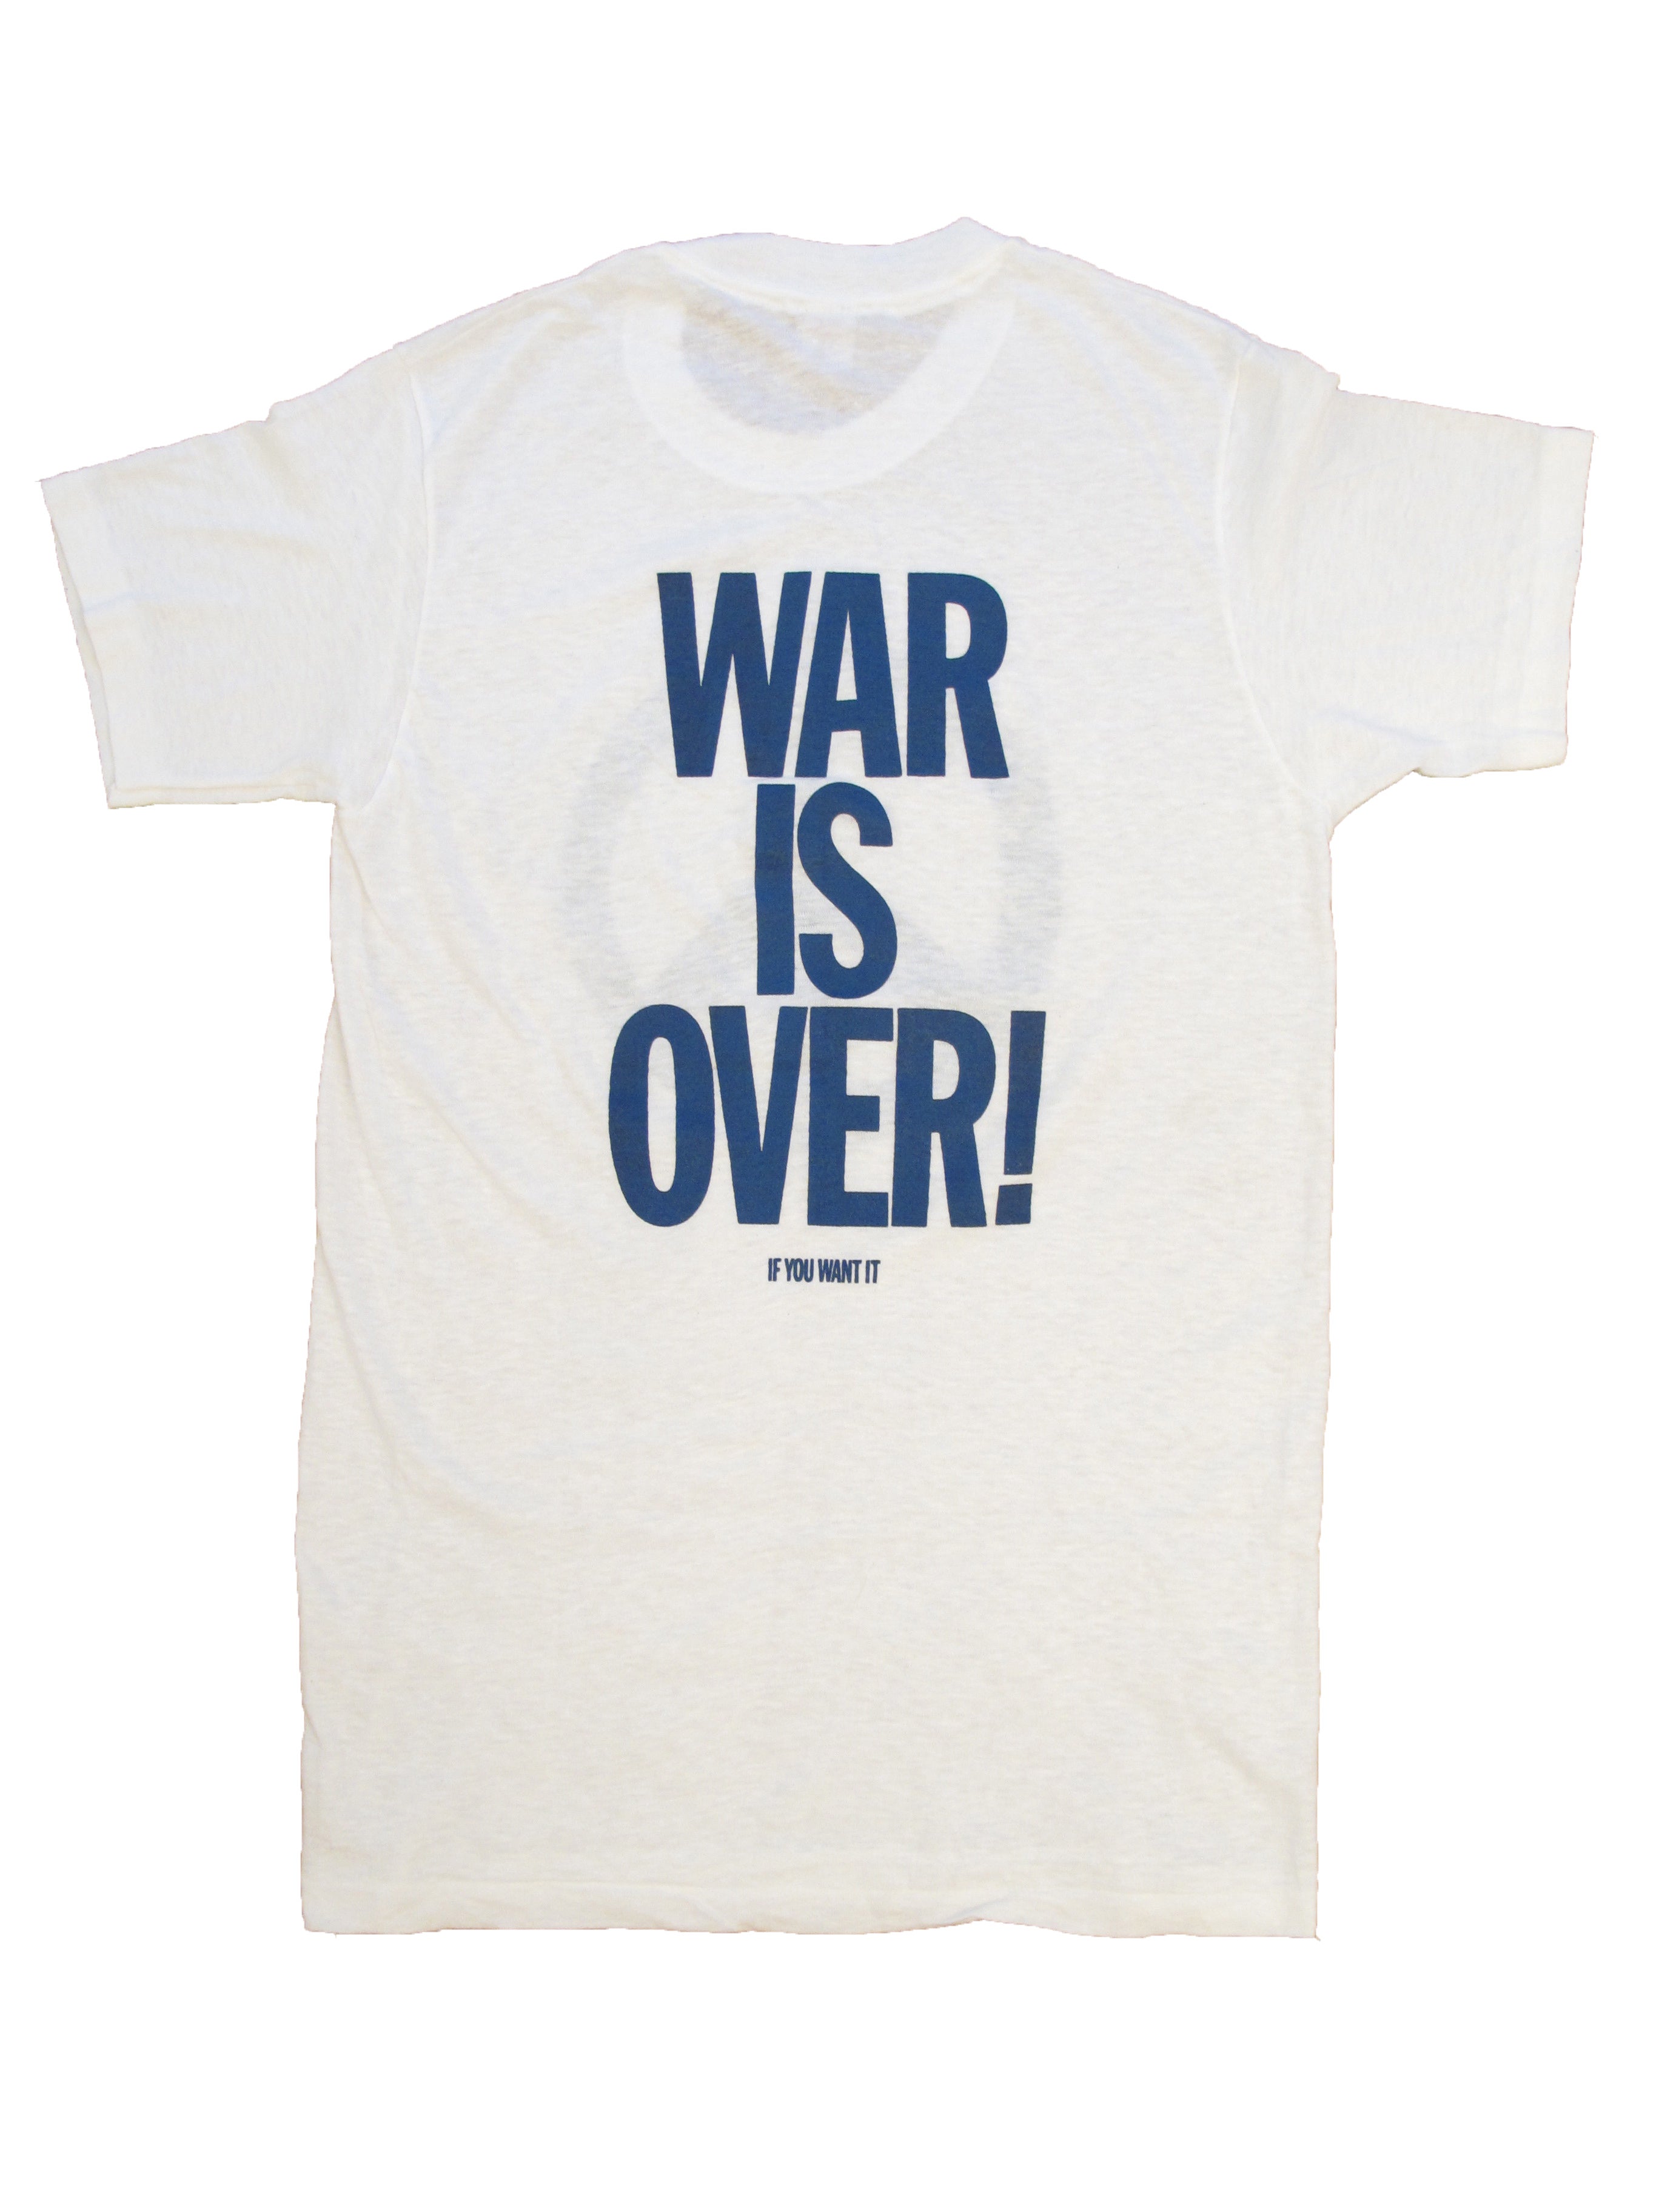 War is Over! Peace T-Shirt After John Lennon and Yoko Ono